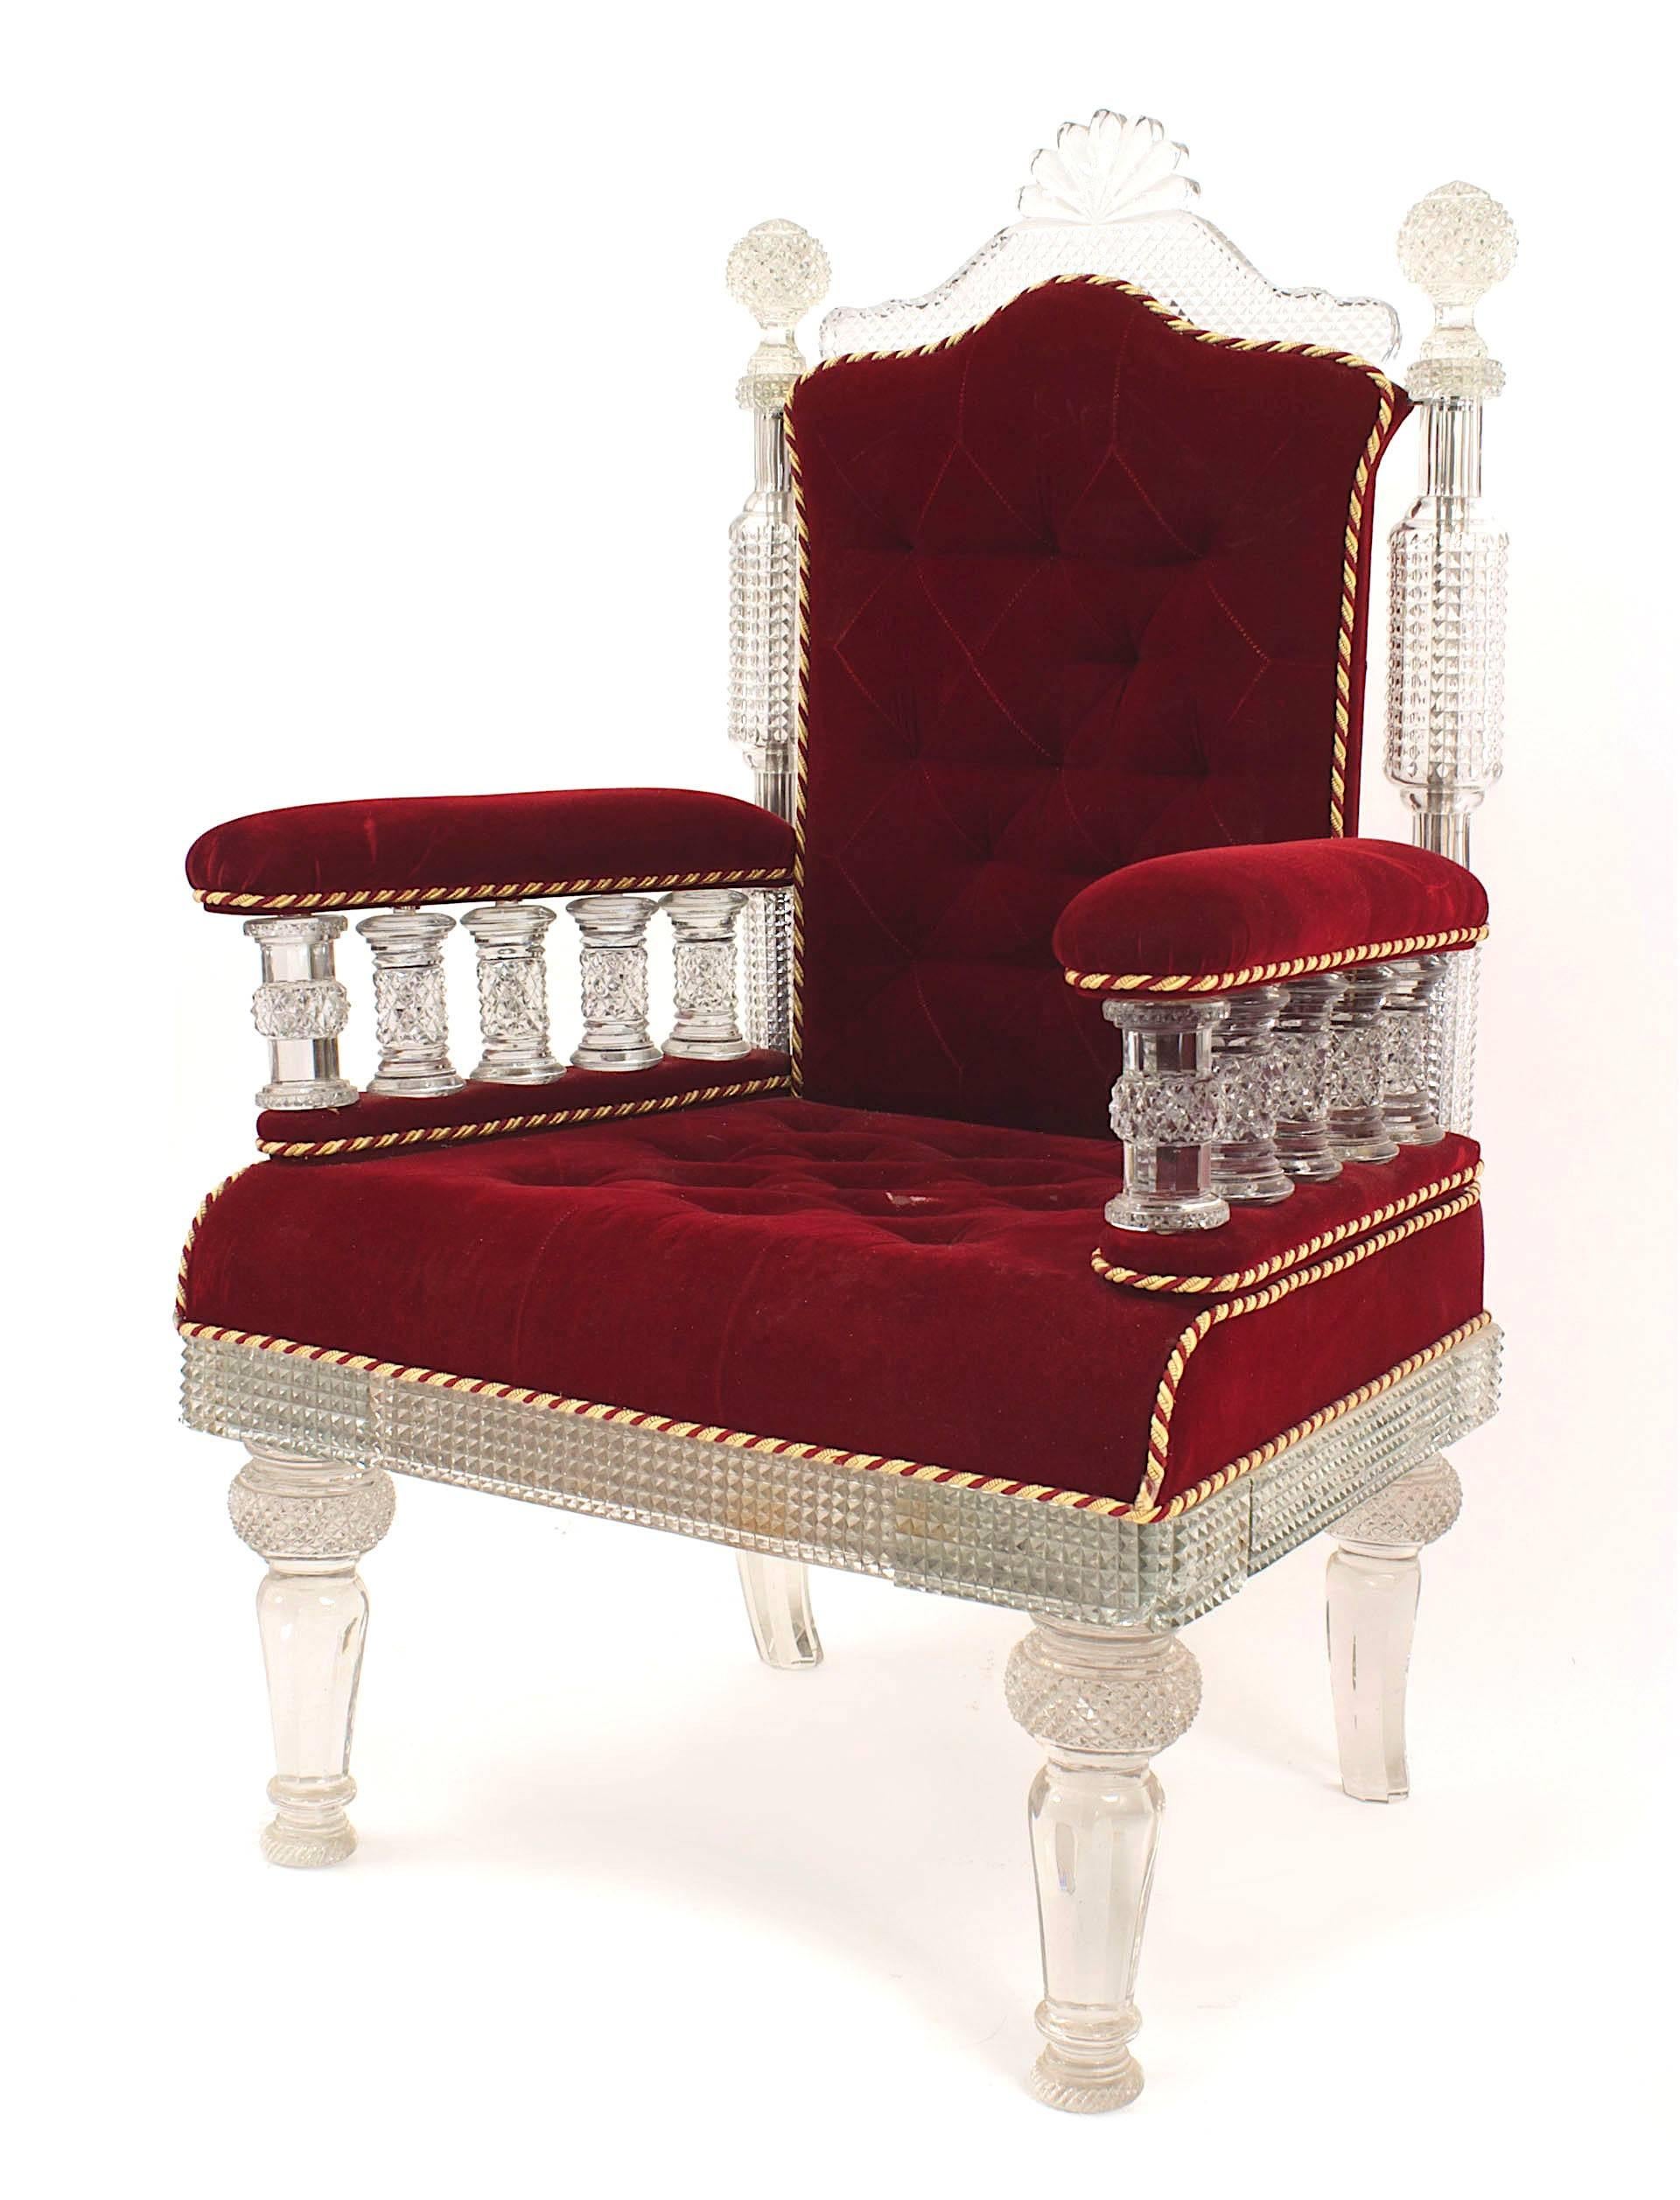 English Anglo-Indian style cut crystal chair with red velvet upholstered seat and back. (20th Century, the design taken from the Osler archive of 1880)
